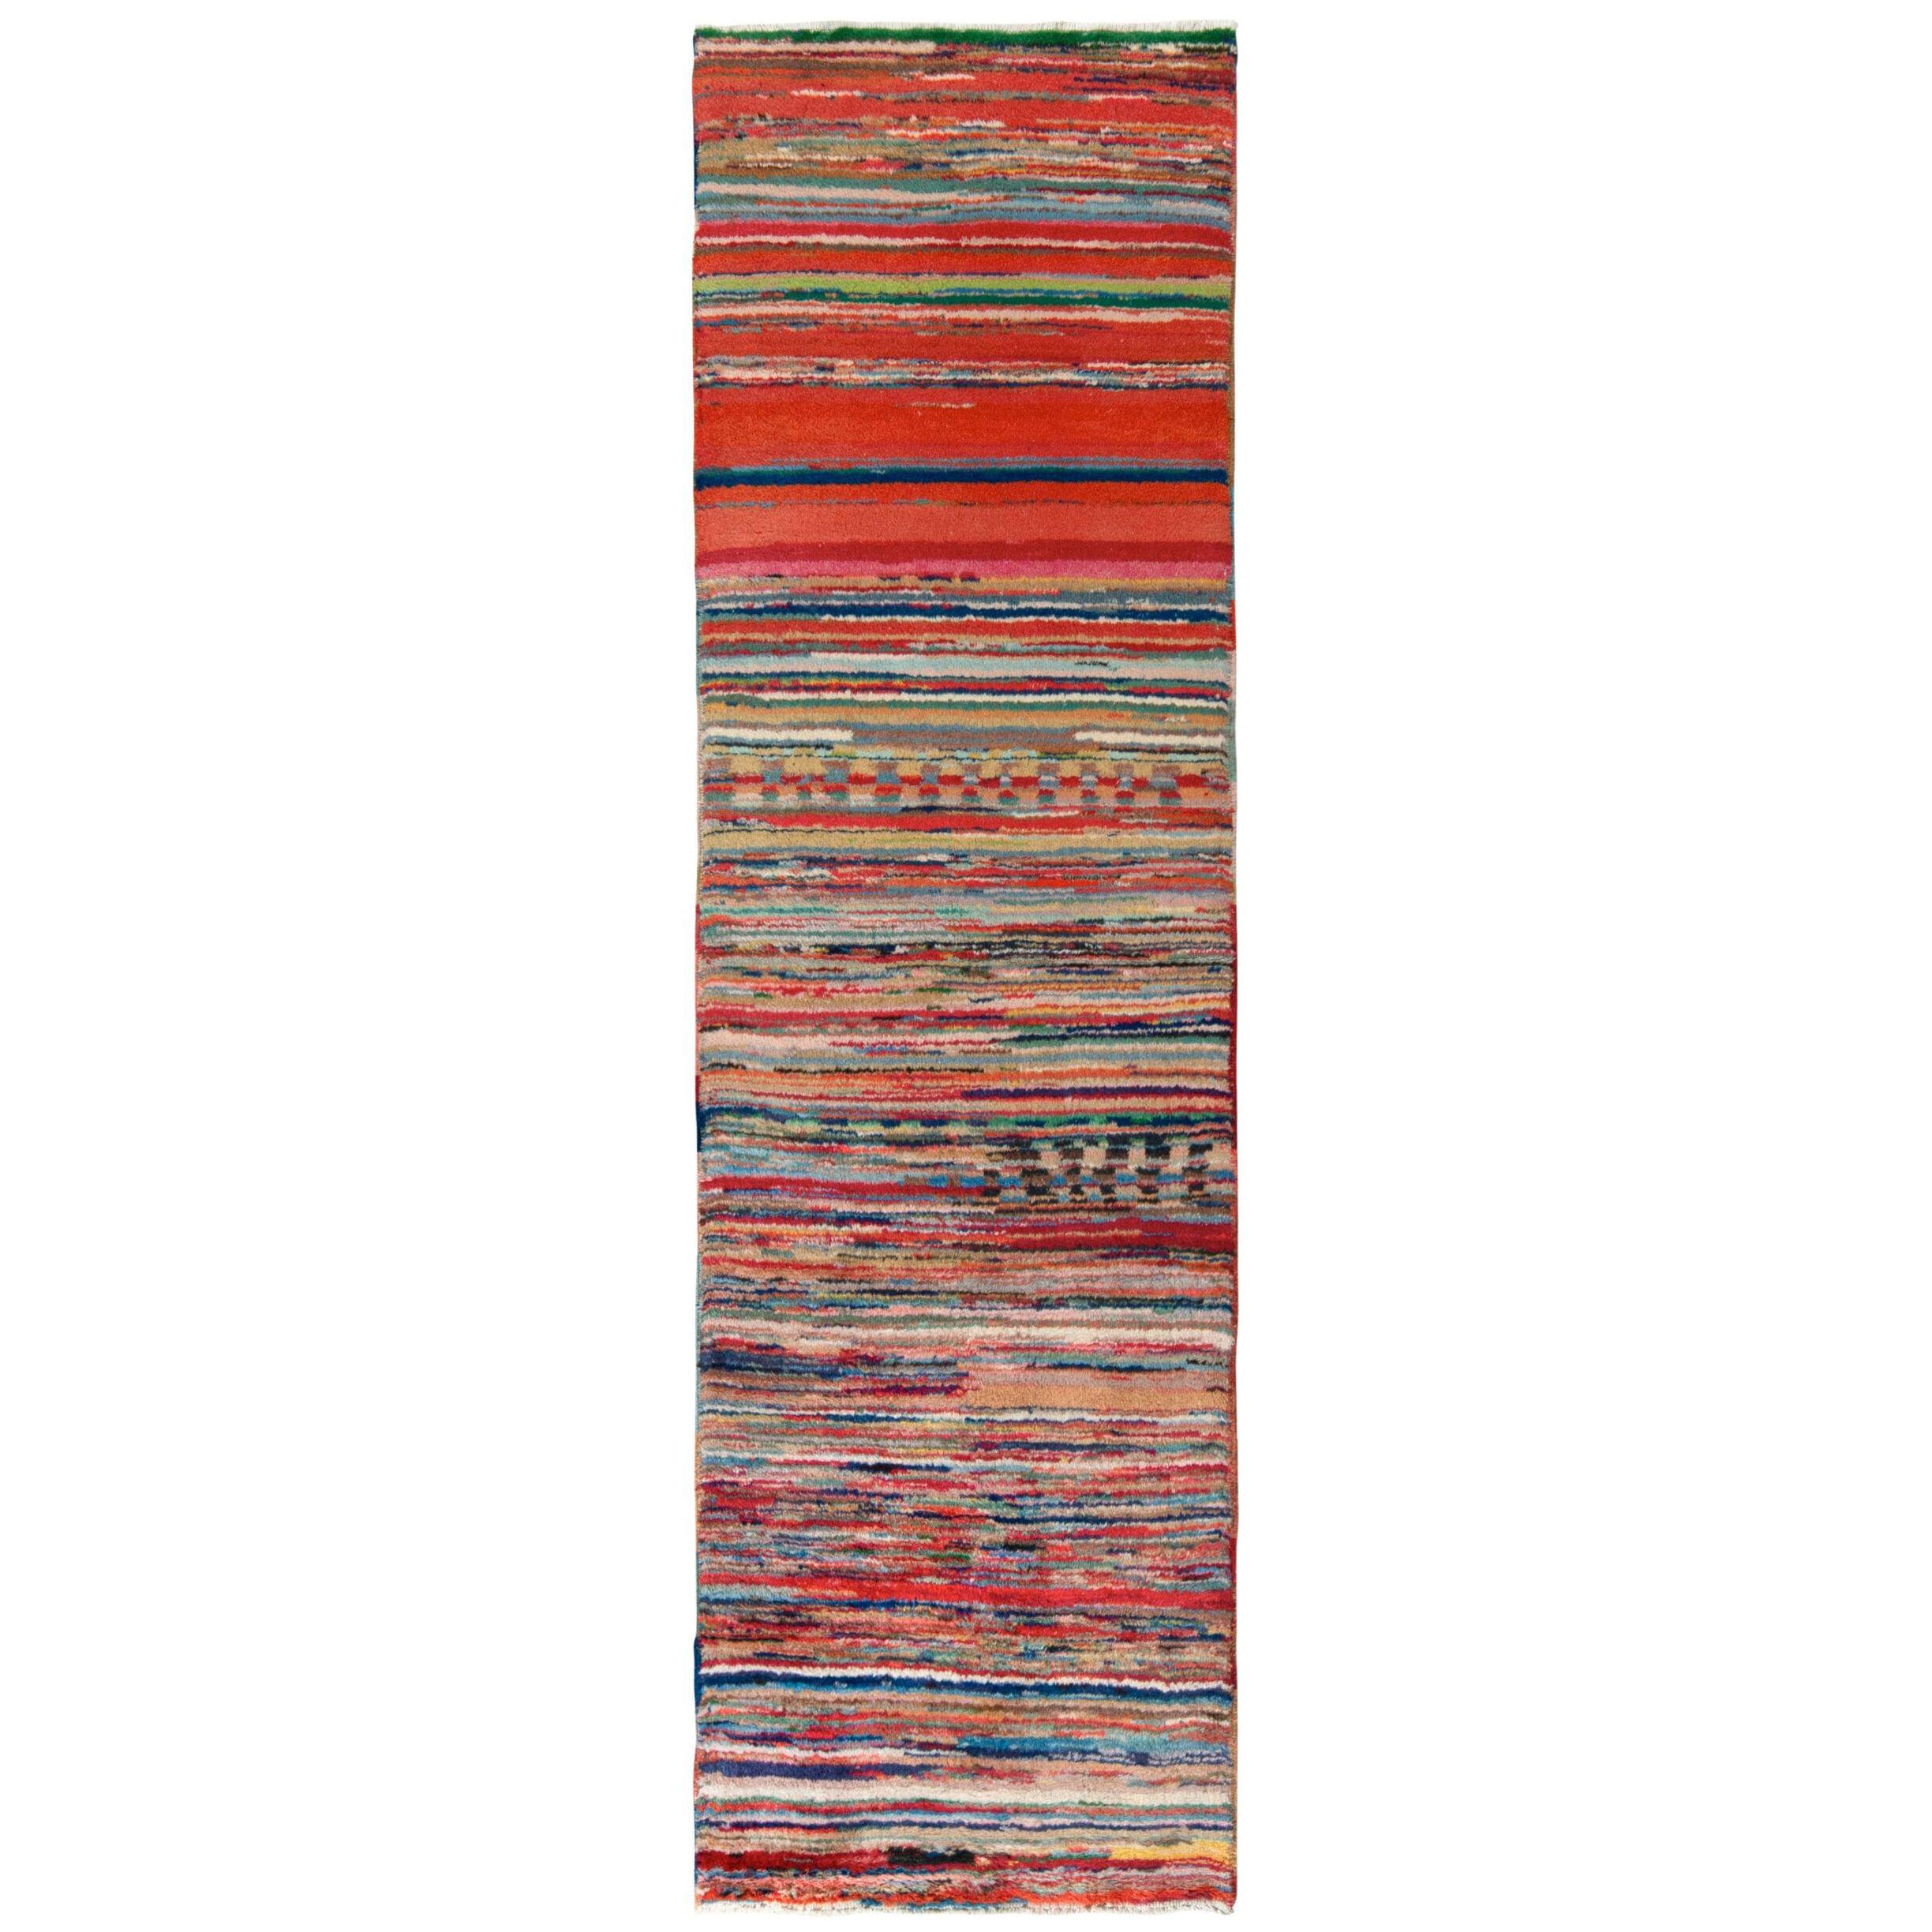 1960s Vintage Turkish Mid-Century Runner in Red, Multicolor Striped Pattern